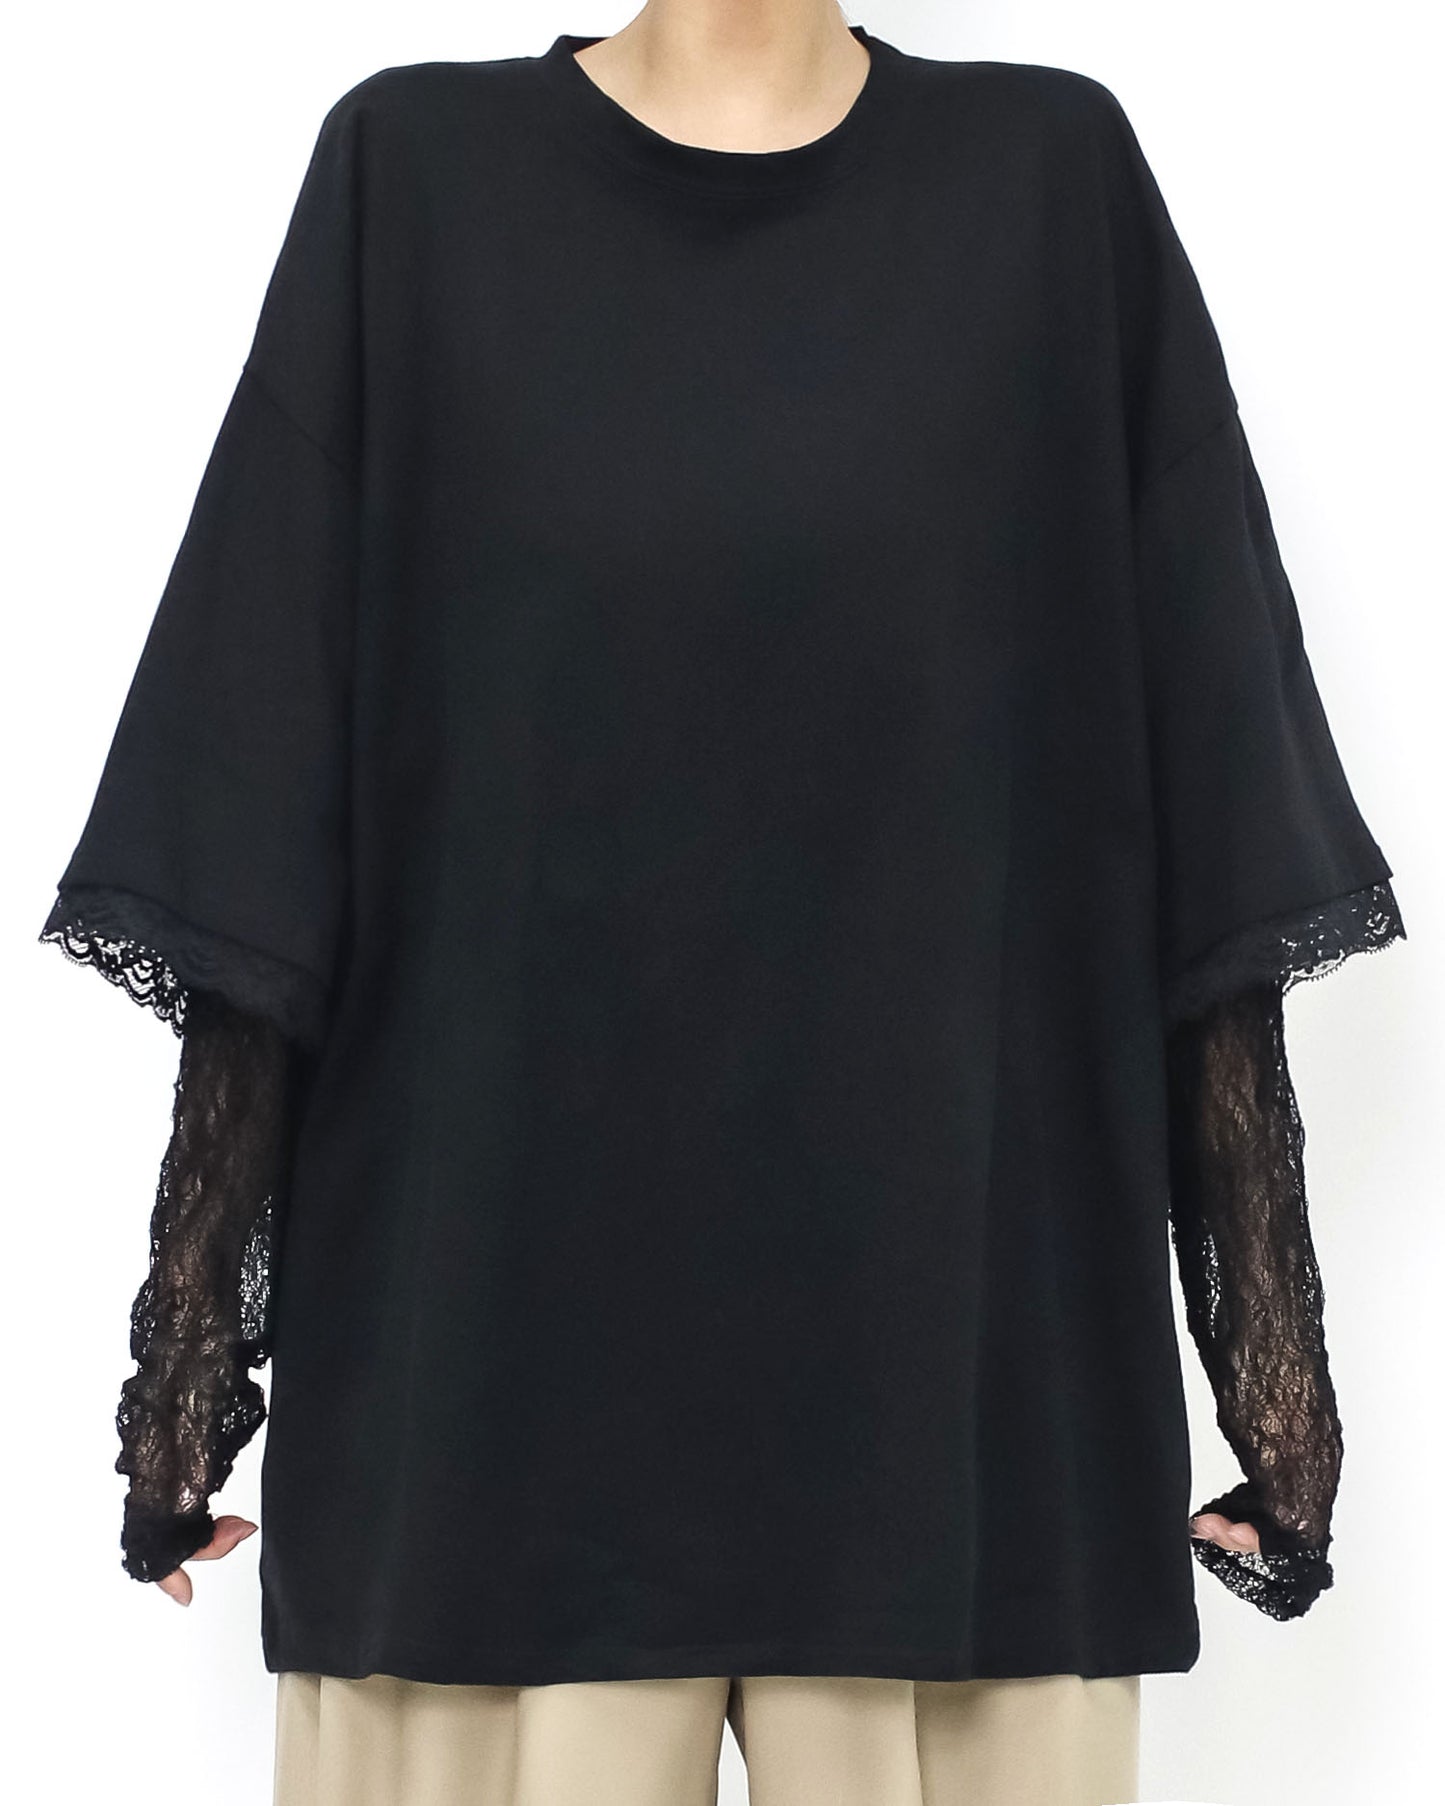 black tee w/ lace layer sleeves top